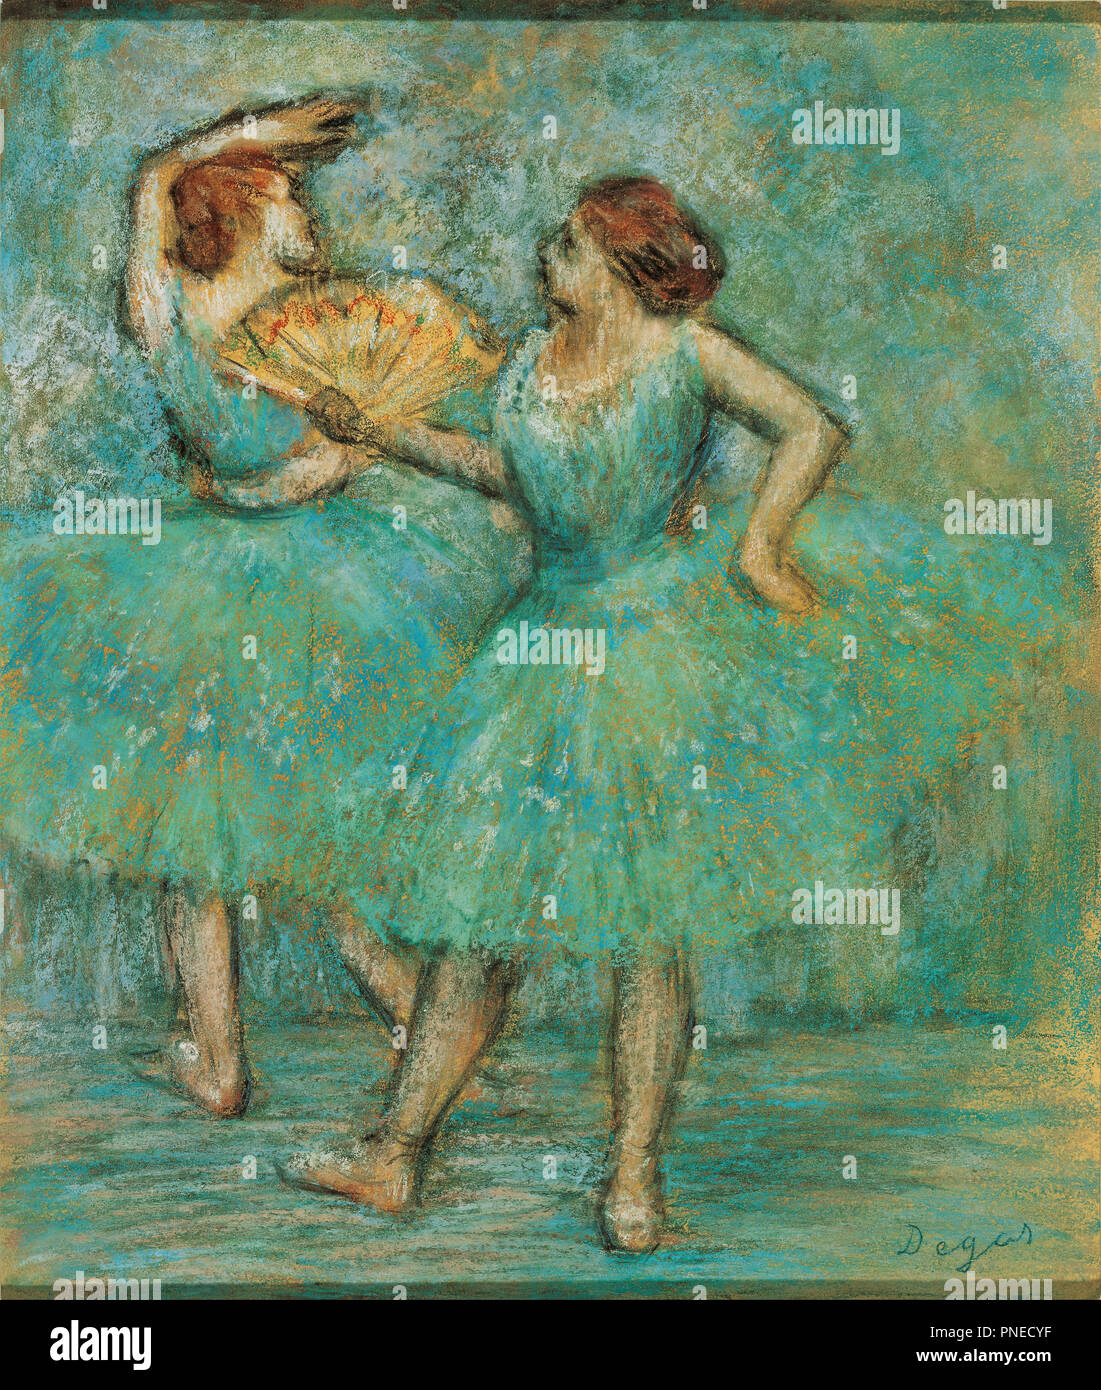 Two Dancers, c. 1905. Date/Period: Ca. 1905. Pastel on cardboard. Author: EDGAR DEGAS. Stock Photo